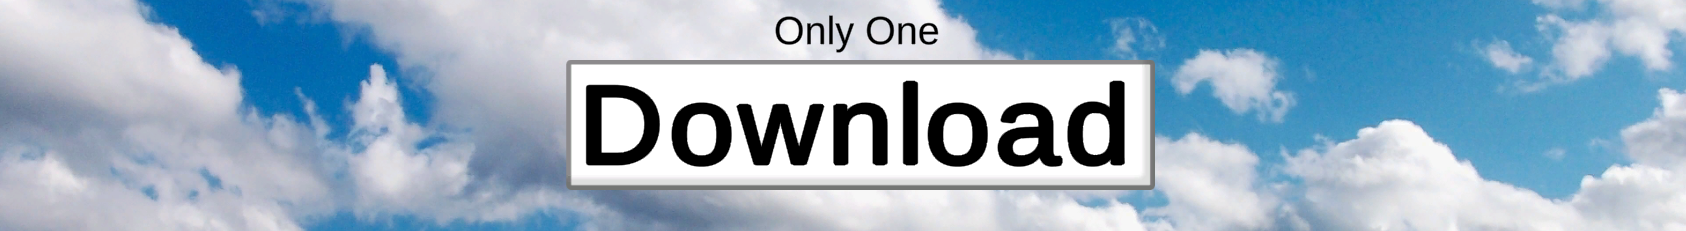 Only One Download